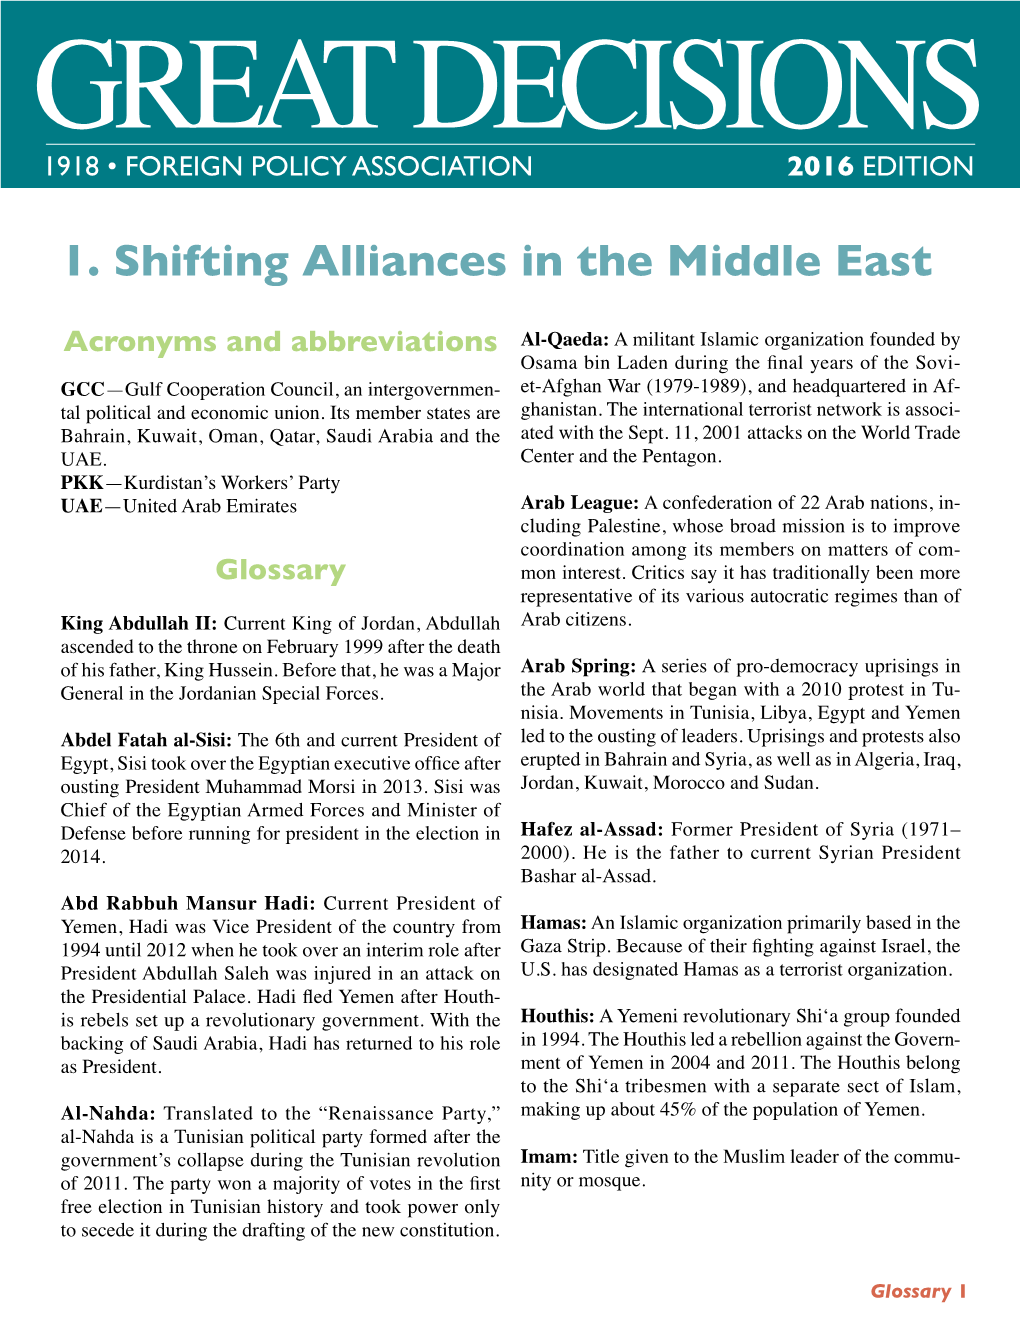 1. Shifting Alliances in the Middle East